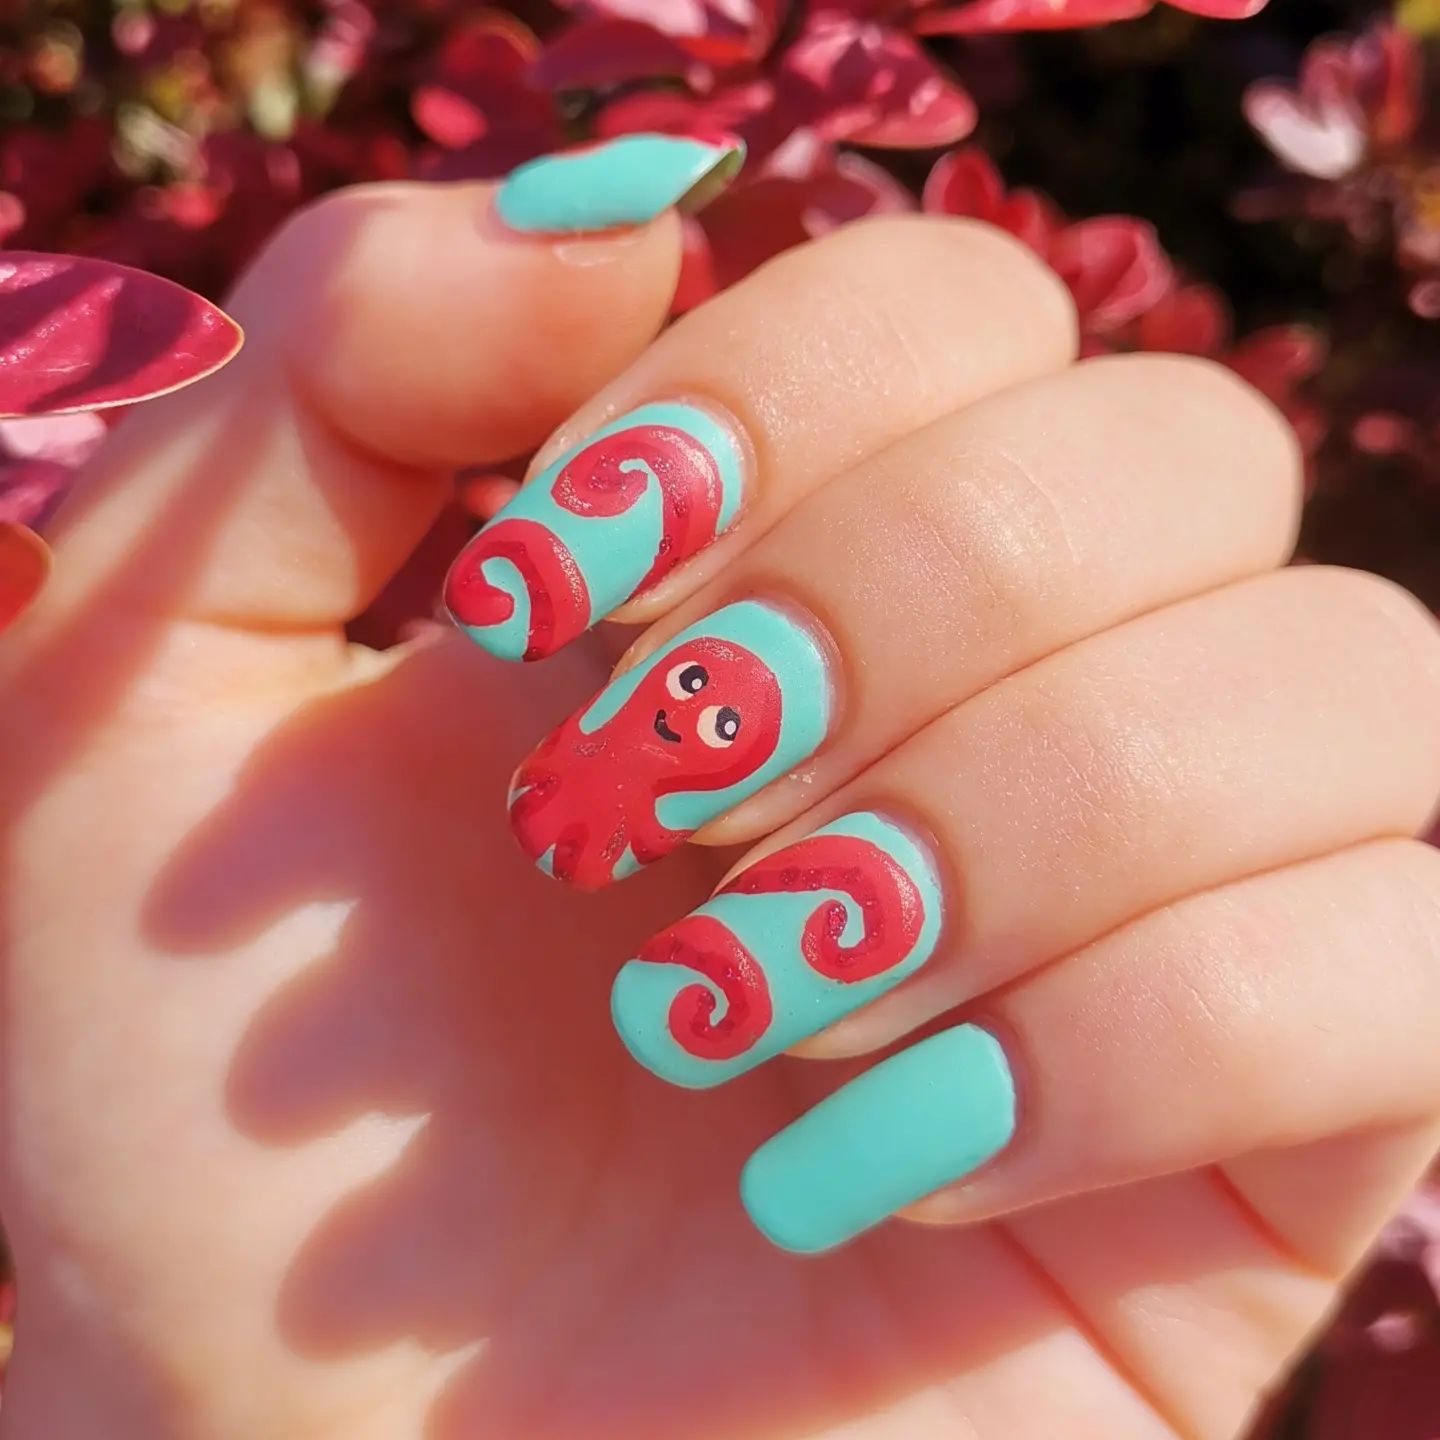 Creativity always wins! Here is a creative nail design that will make you smile. All you need to do is apply turquoise matte nail polish and draw a pinky octopus that stretches to your four nails. Plus, octopuses symbolize creativity and intelligence.